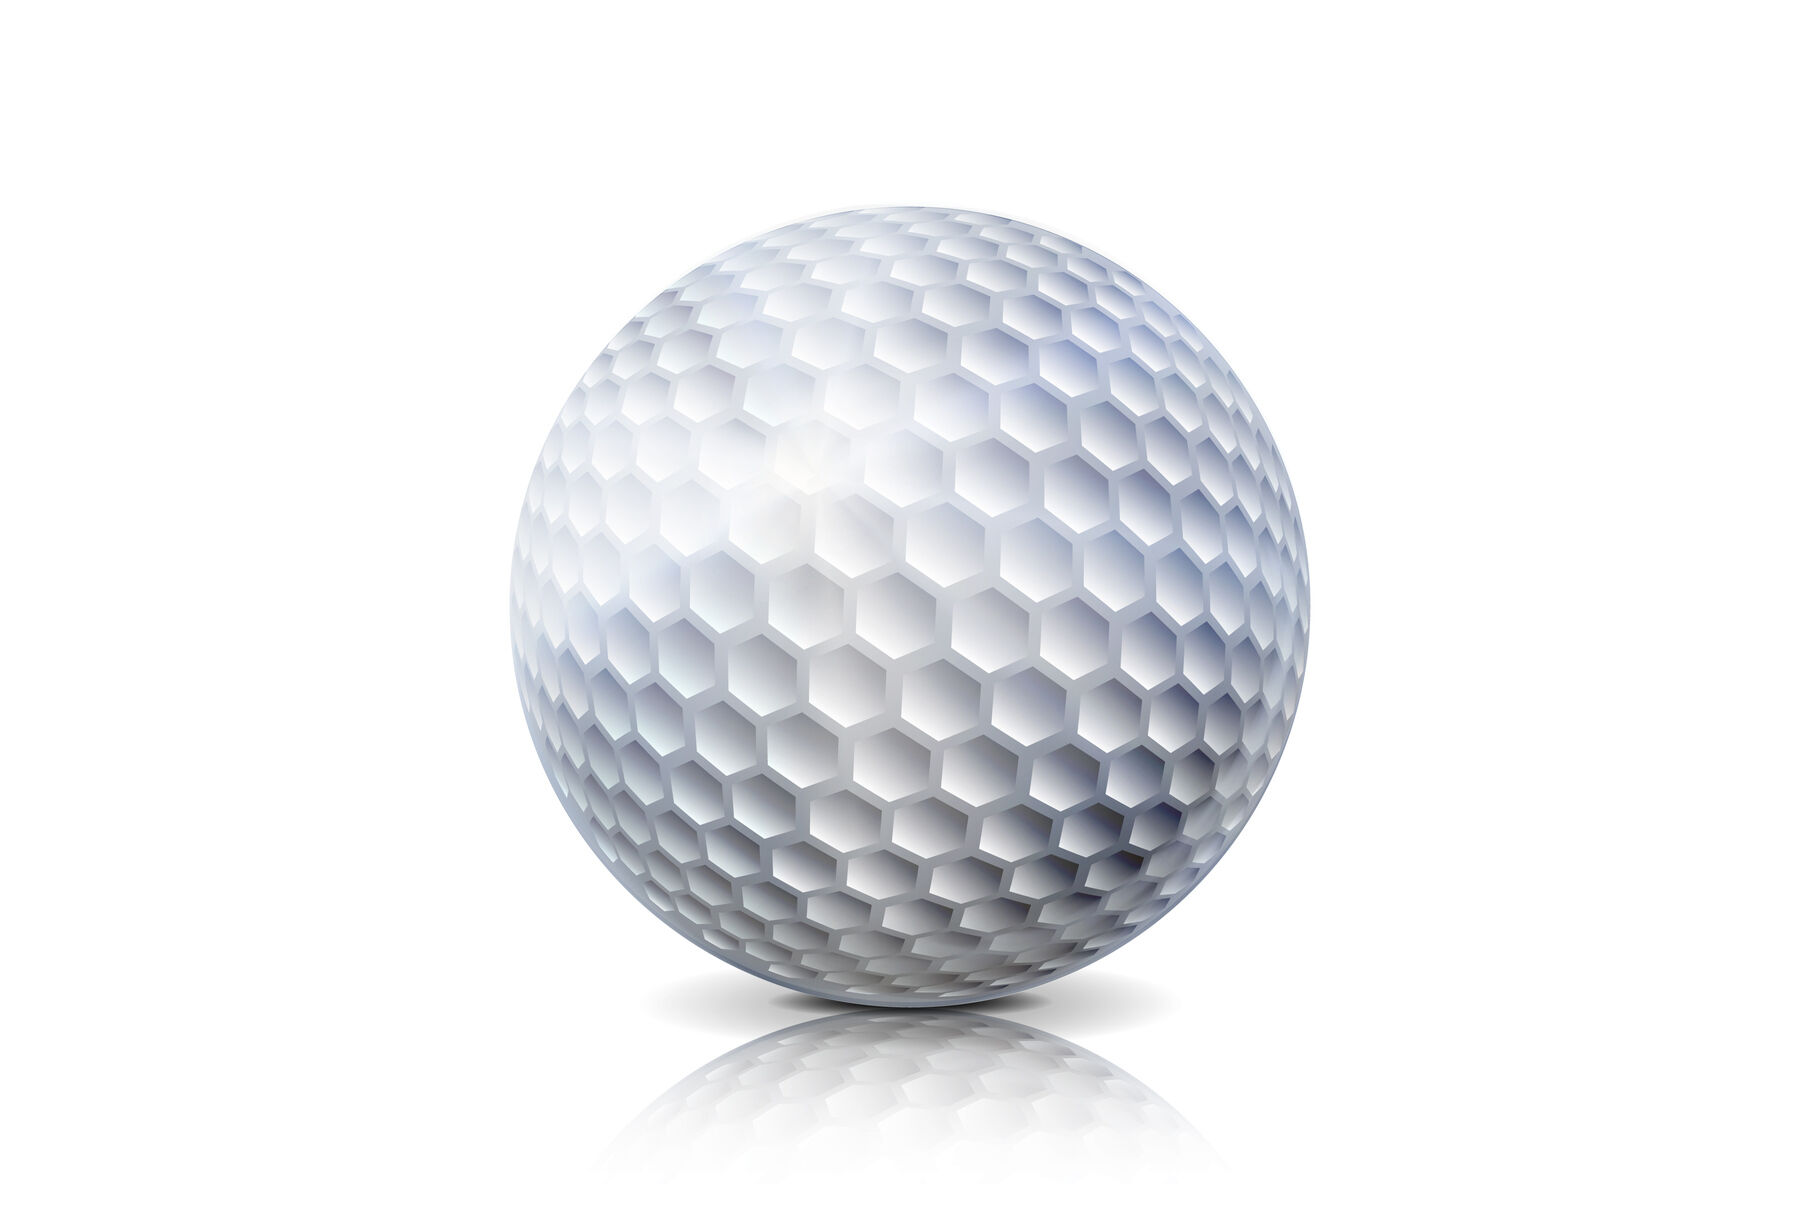 Realistic Golf Ball Isolated On White Background. Traditional Classic ...